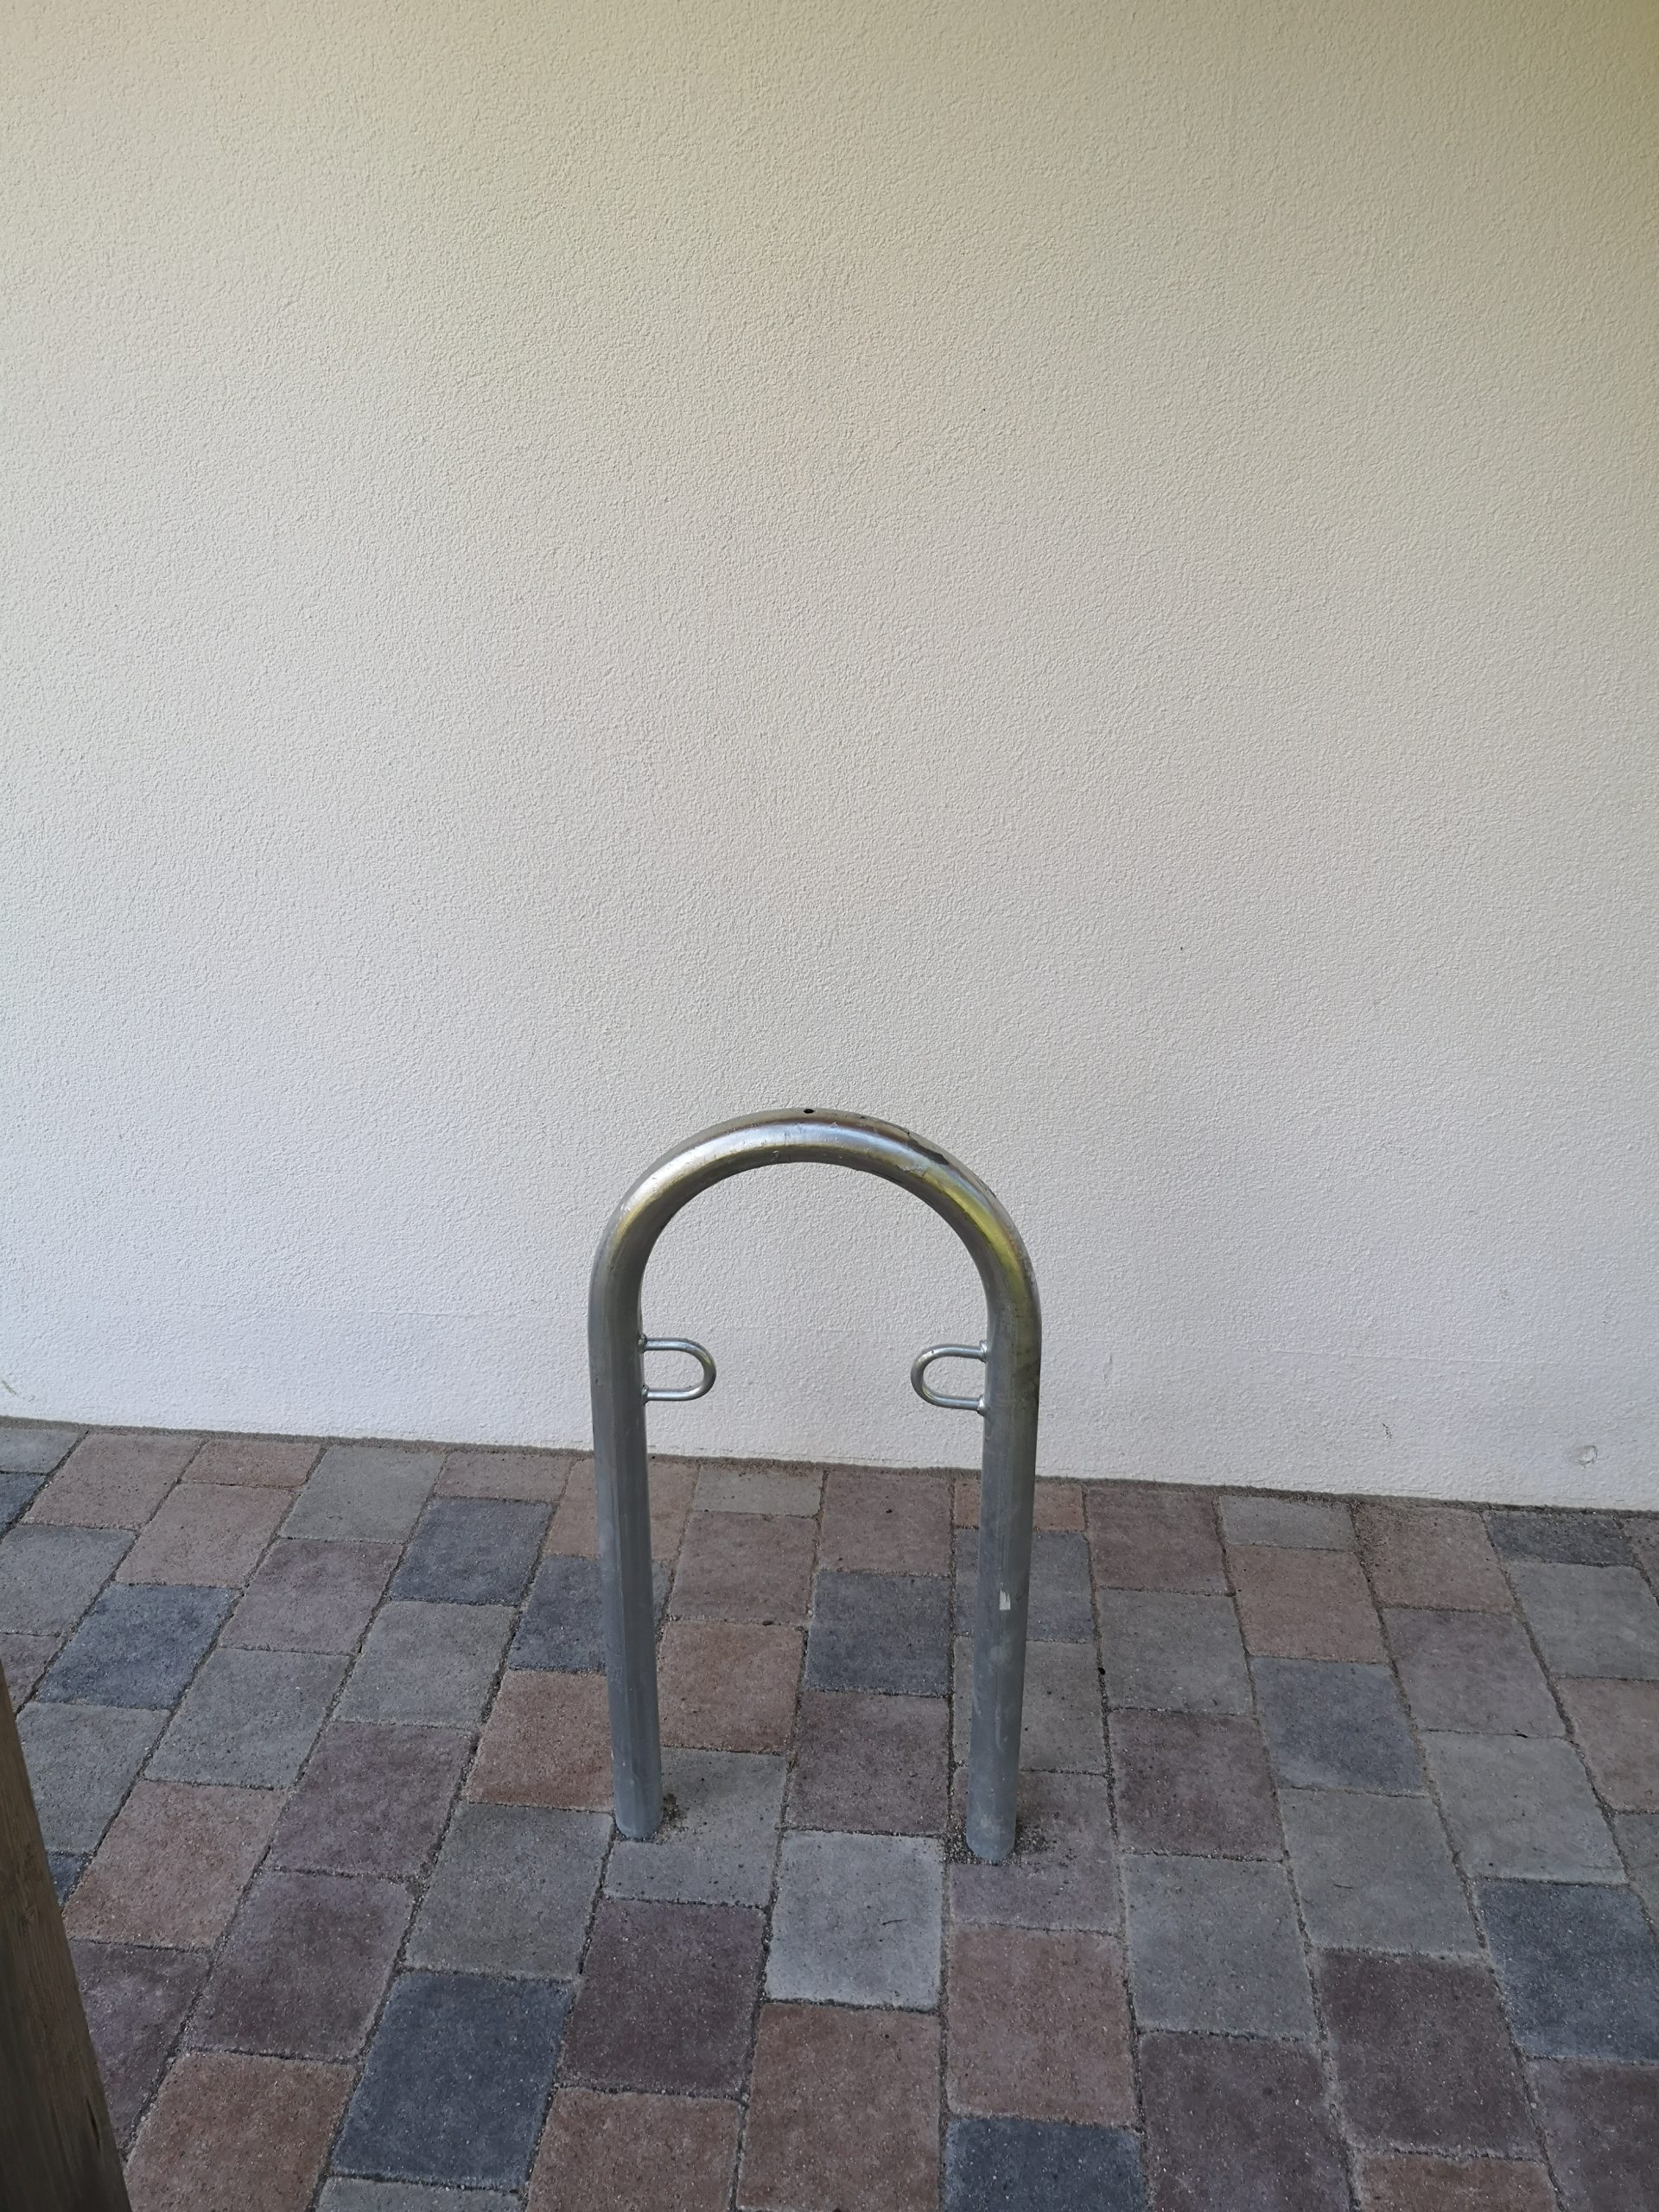 A bicycle hanger for two bicycles.